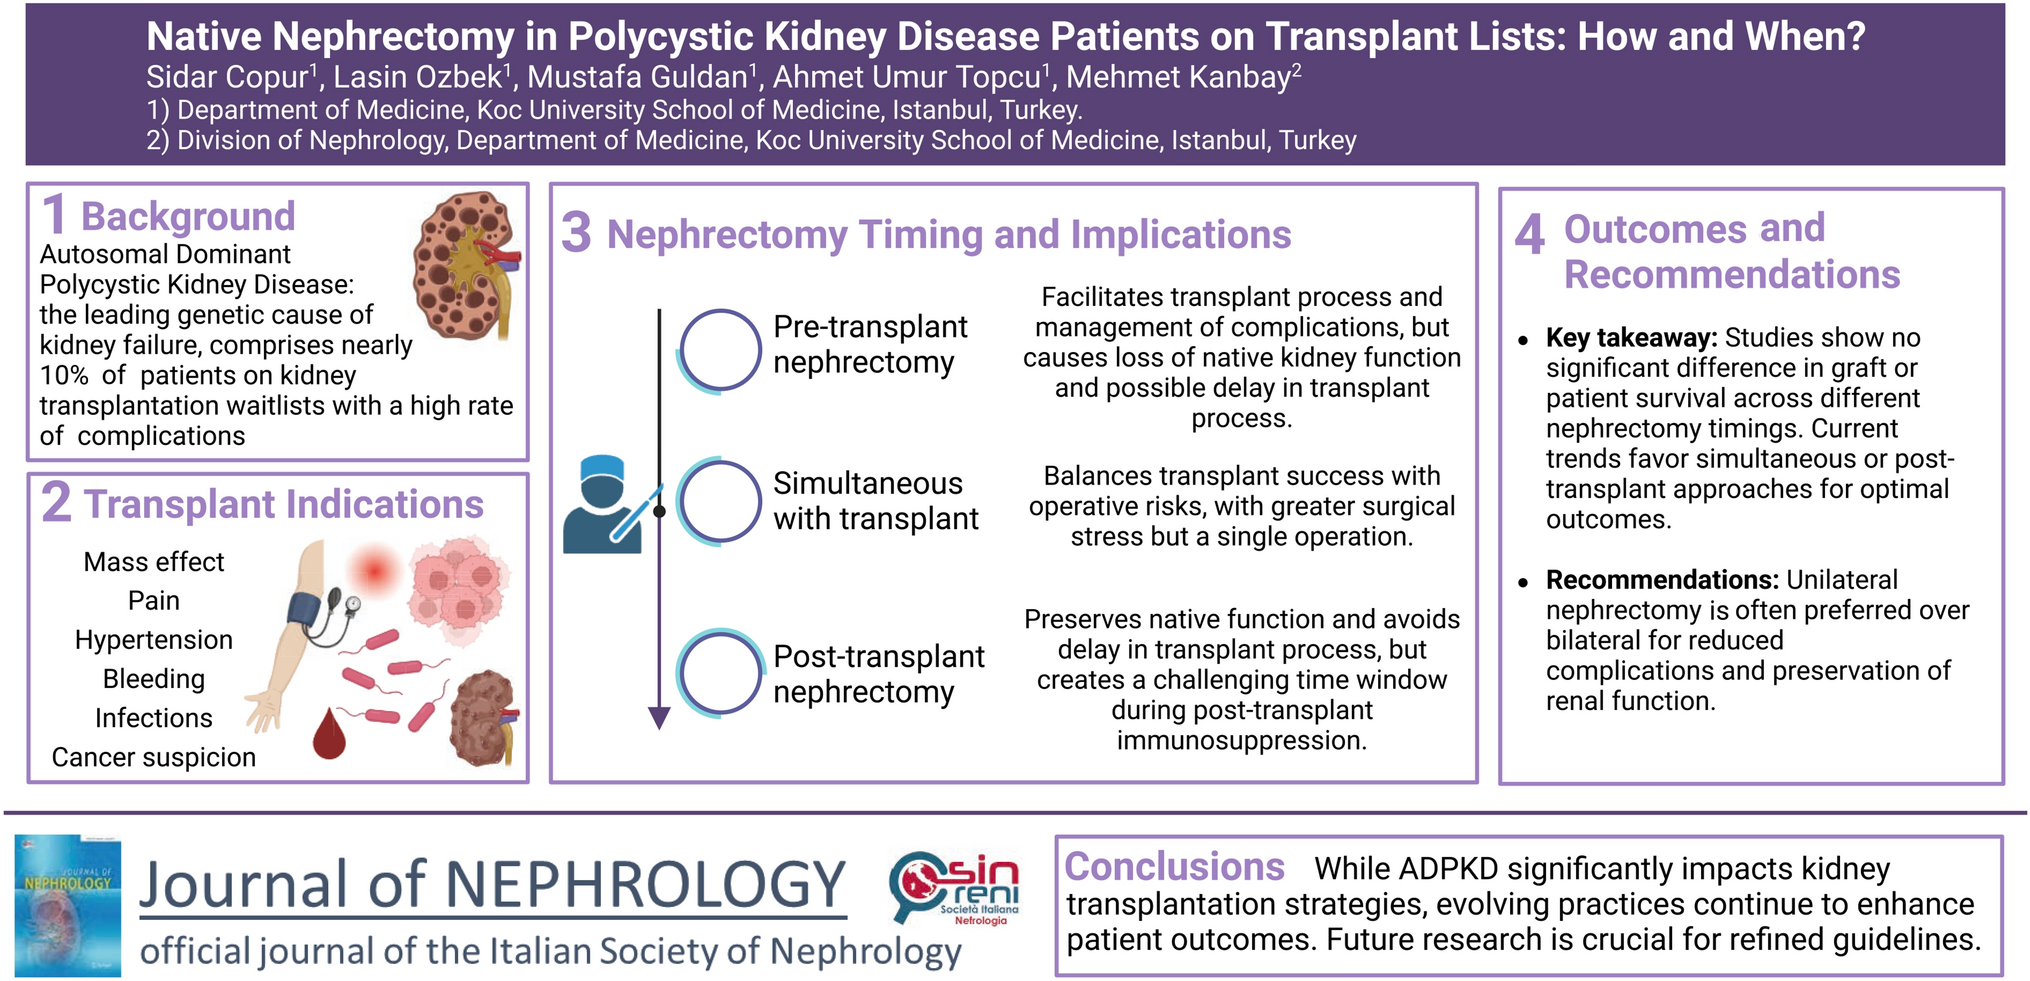 Native nephrectomy in polycystic kidney disease patients on transplant lists: how and when?